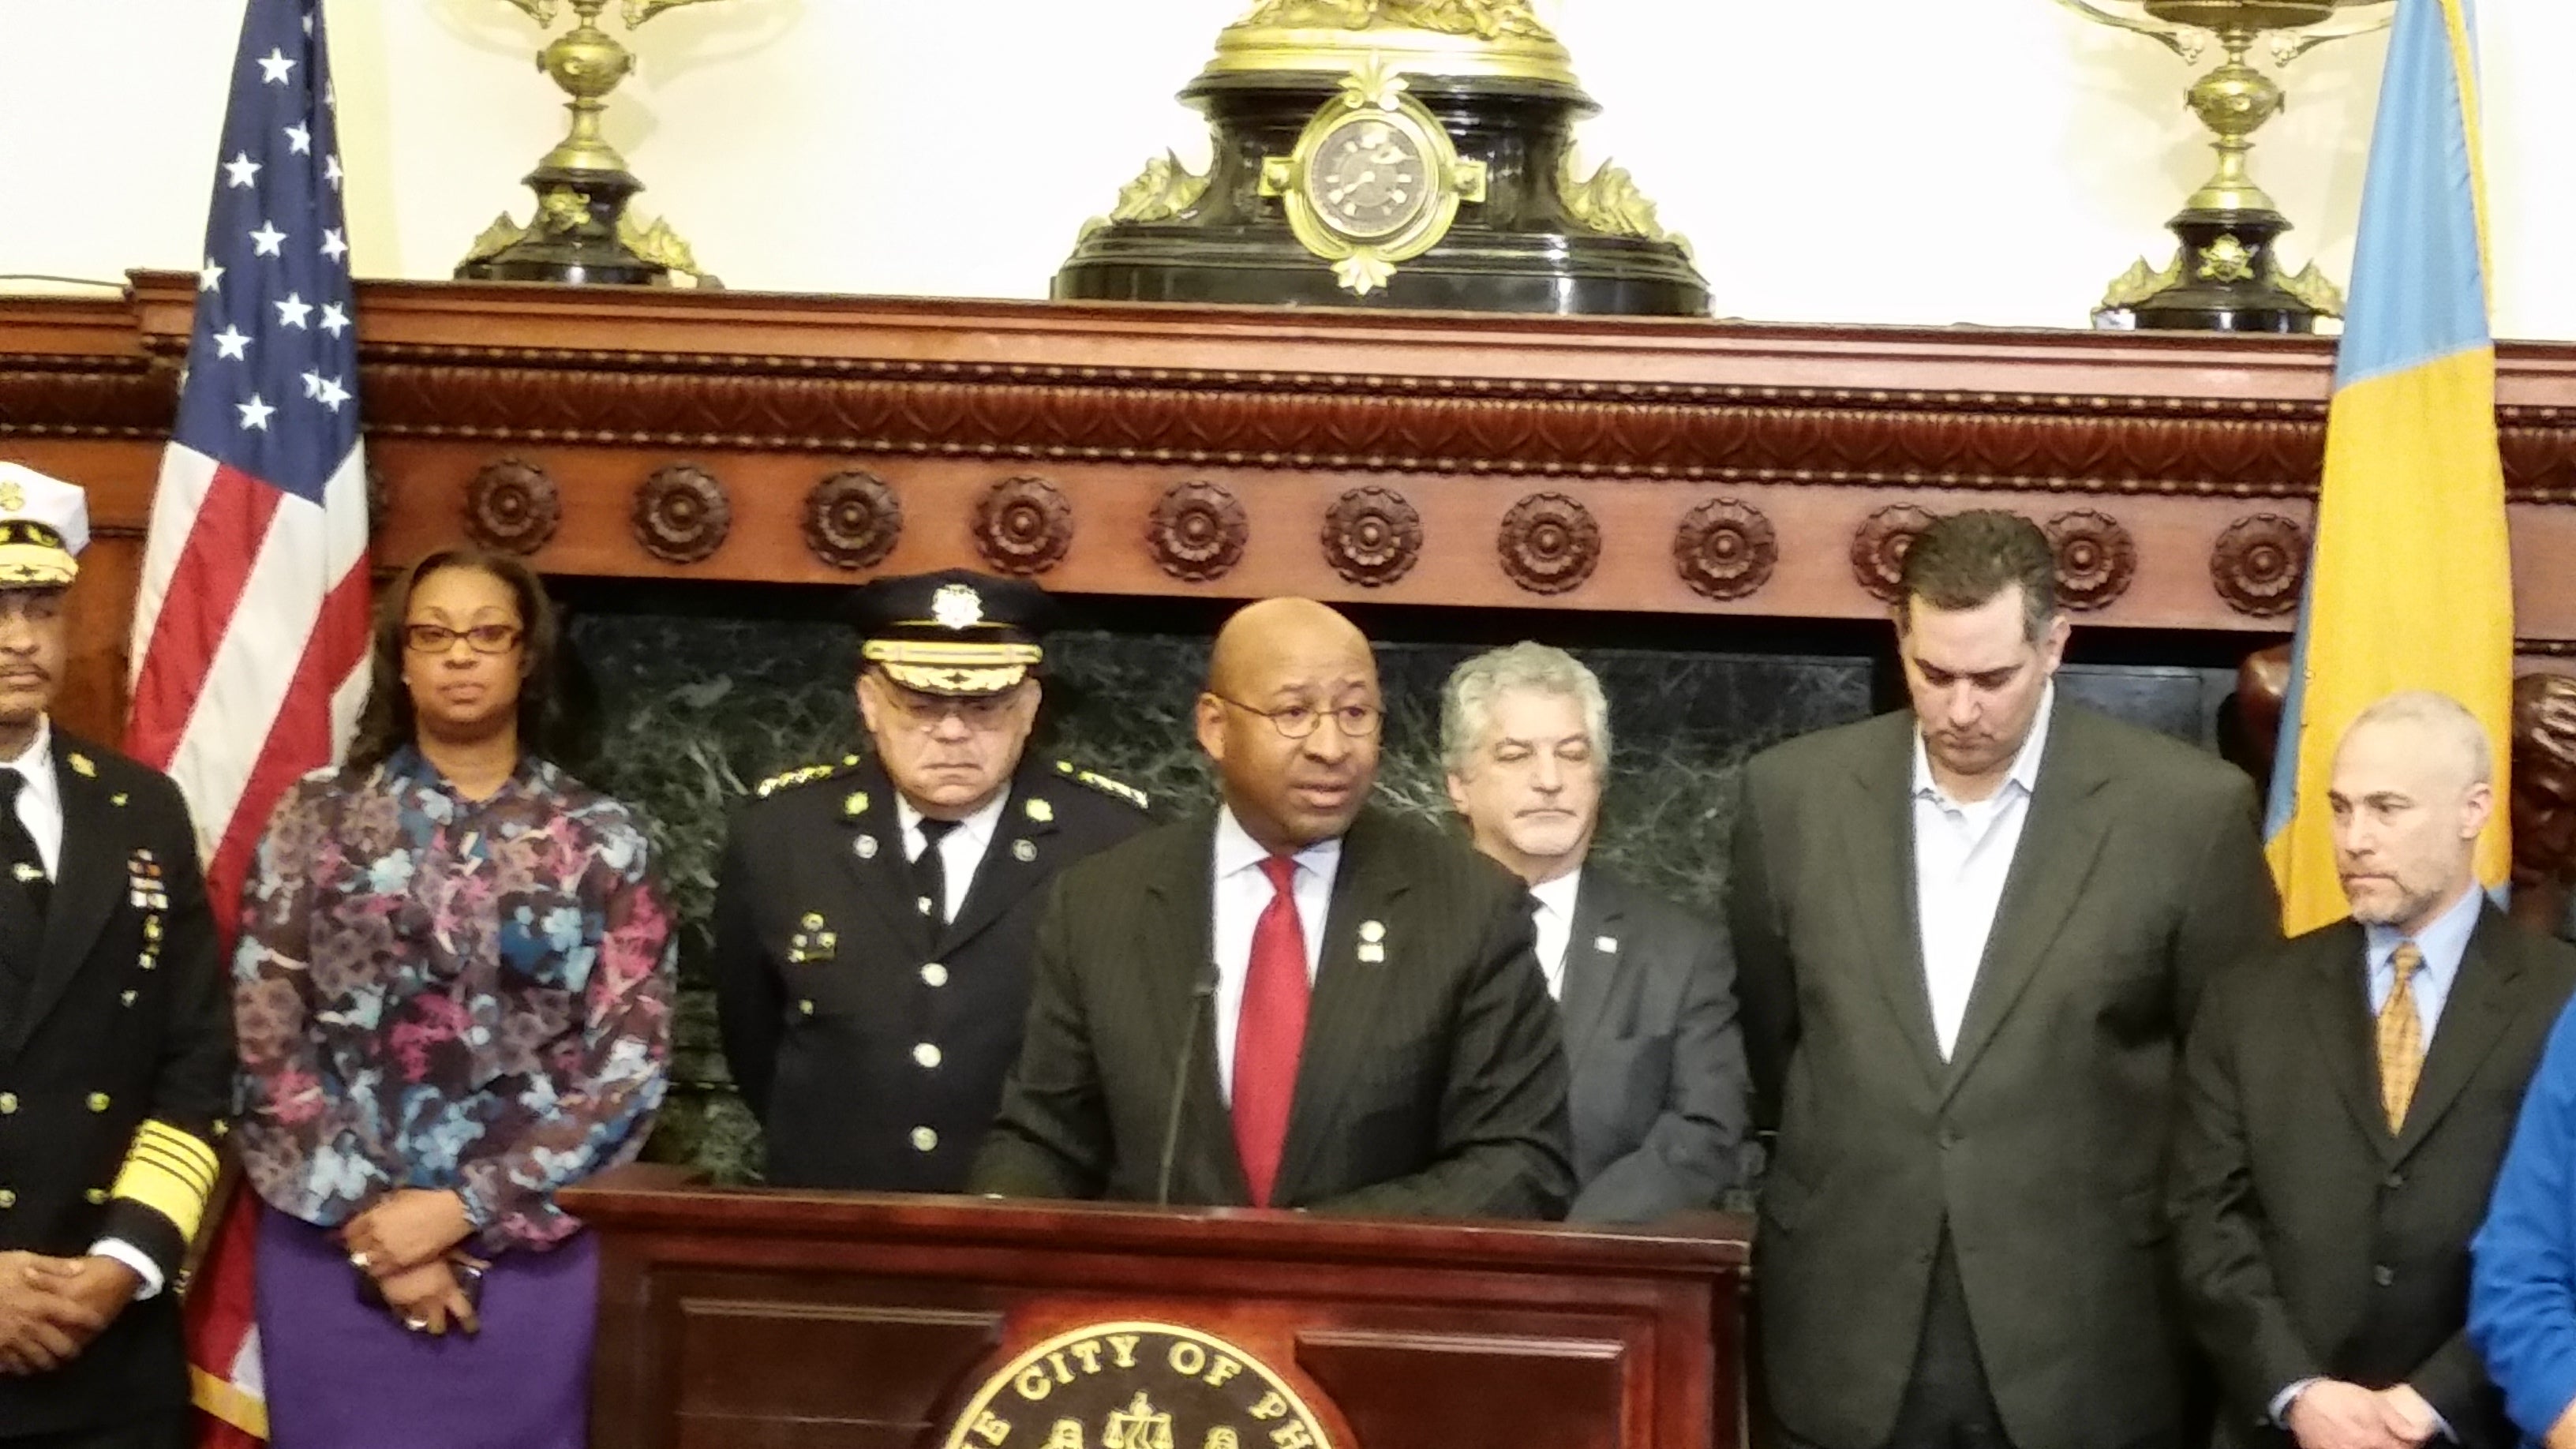  Mayor Michael Nutter and Police Commissioner Charles Ramsey, third from left. 